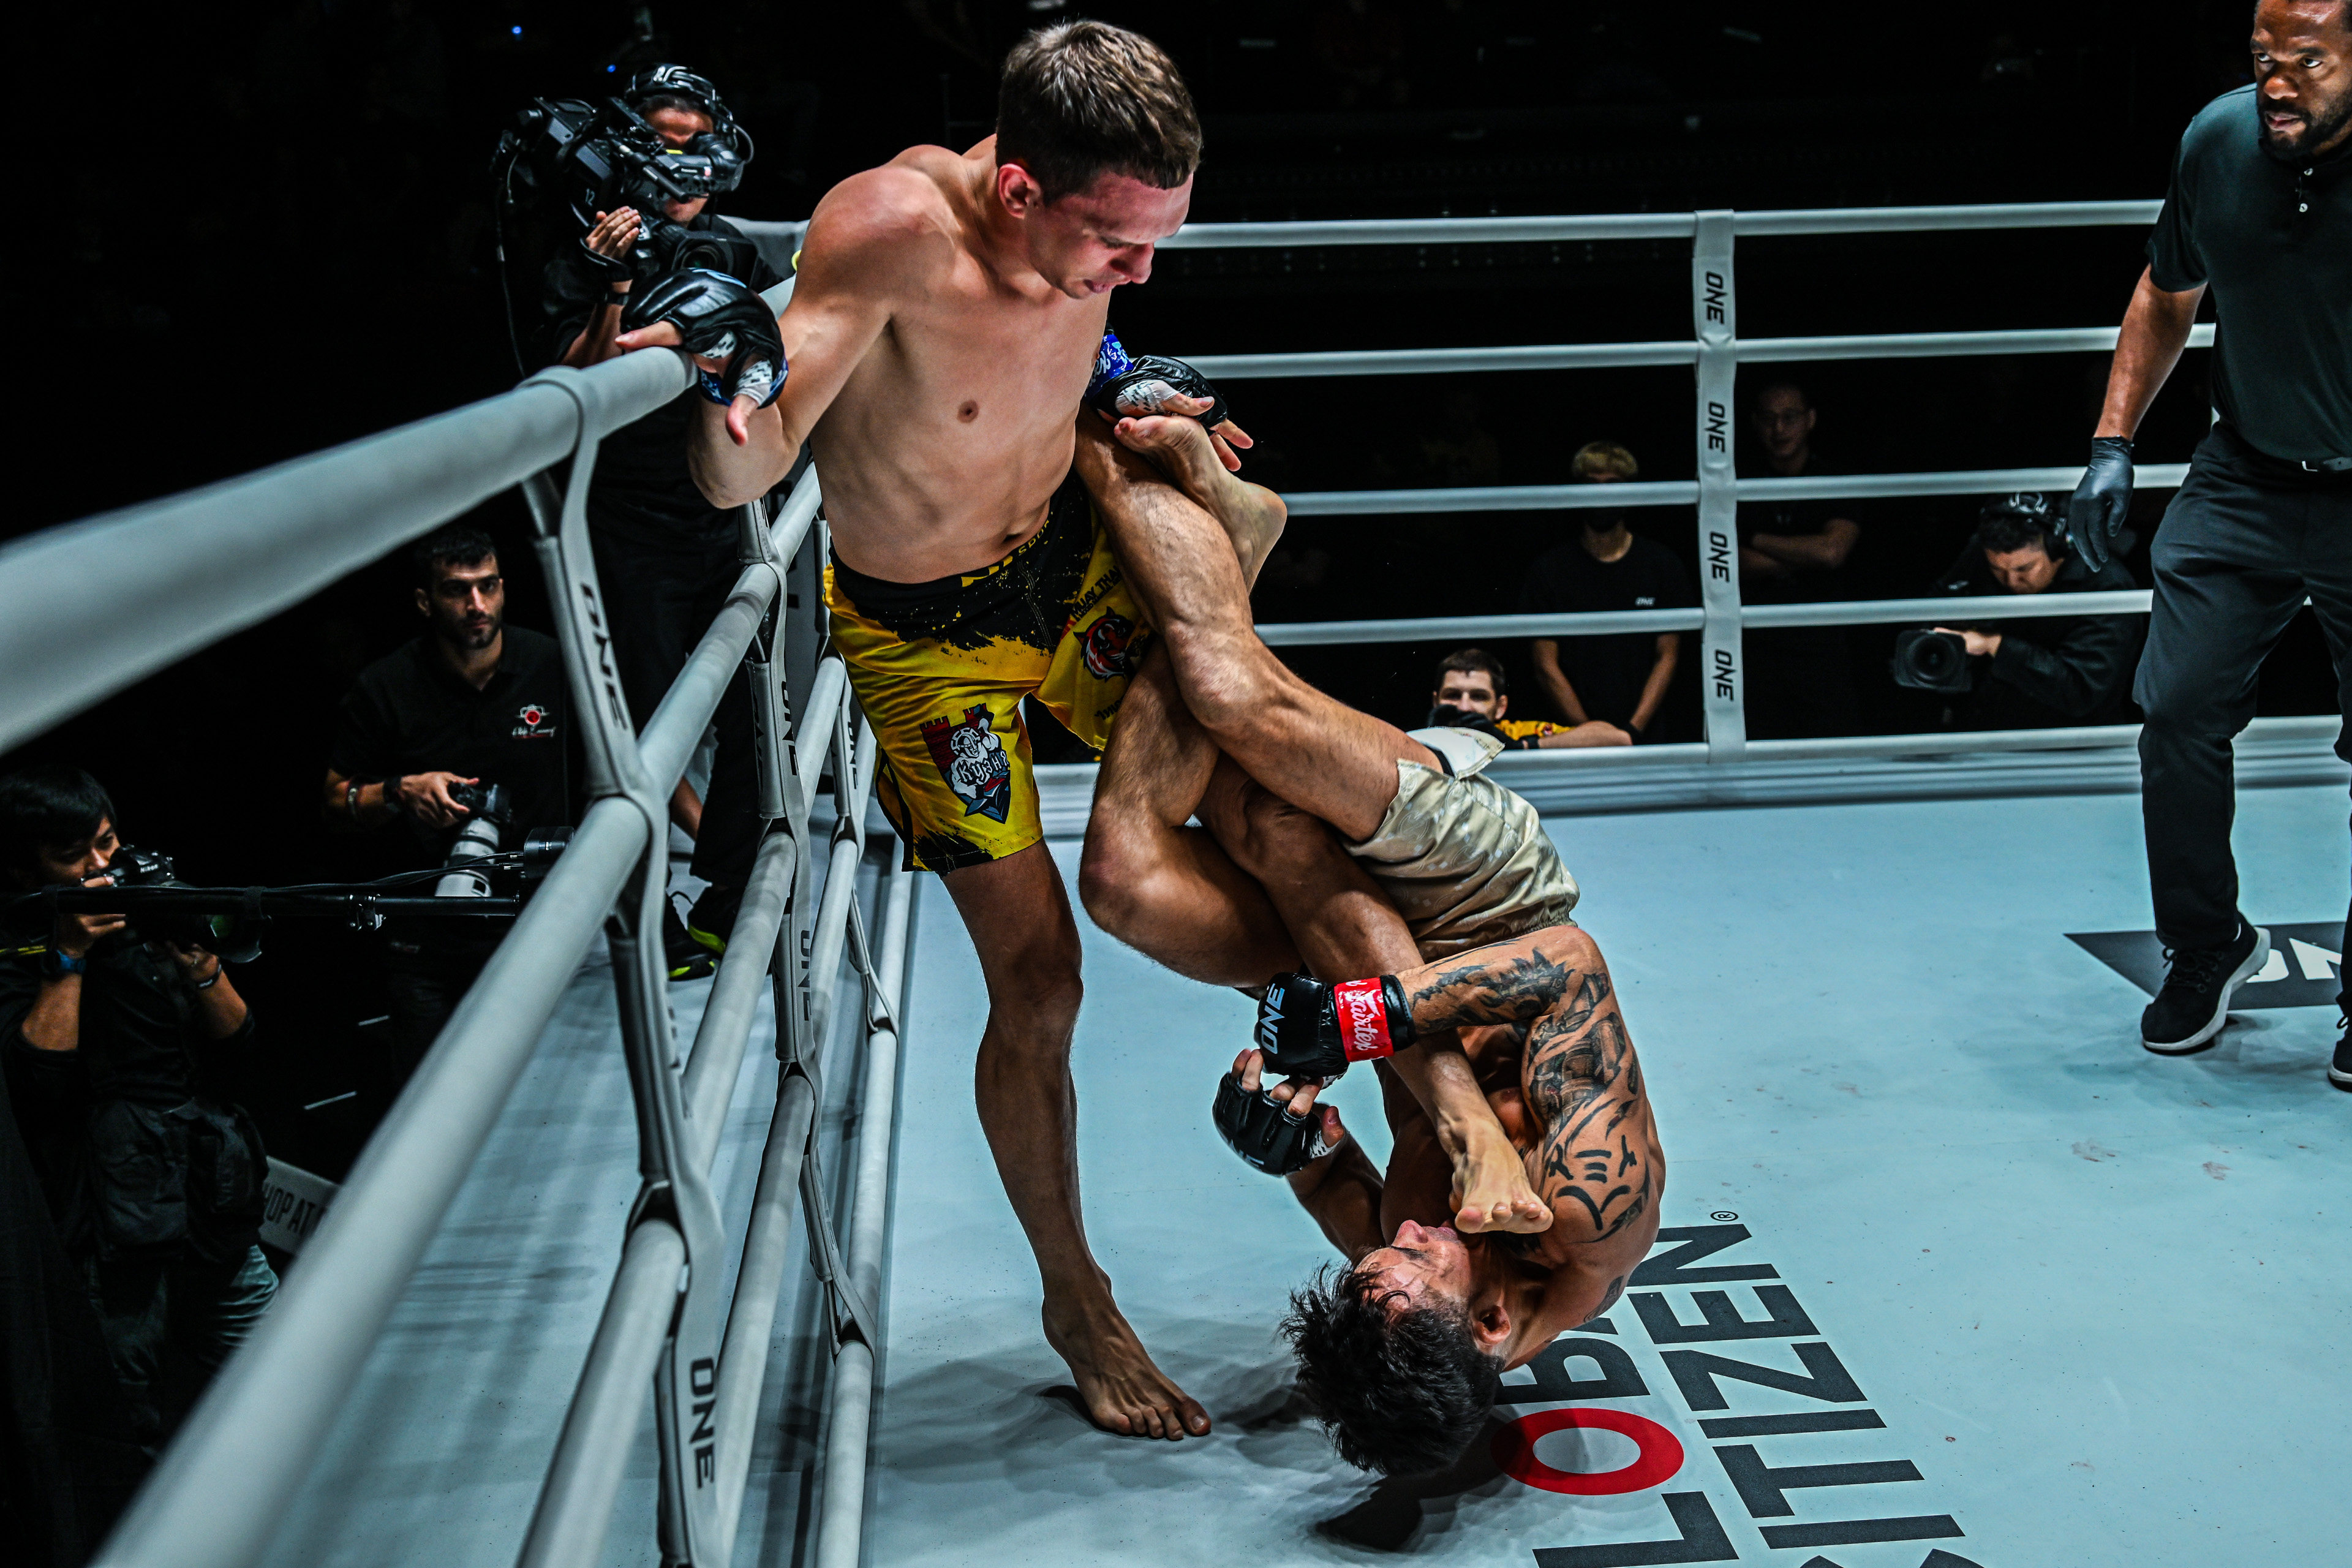 Thanh Le locks in a heel hook against Ilya Freymanov at ONE Fight Night 15 in Bangkok. Photos: ONE Championship